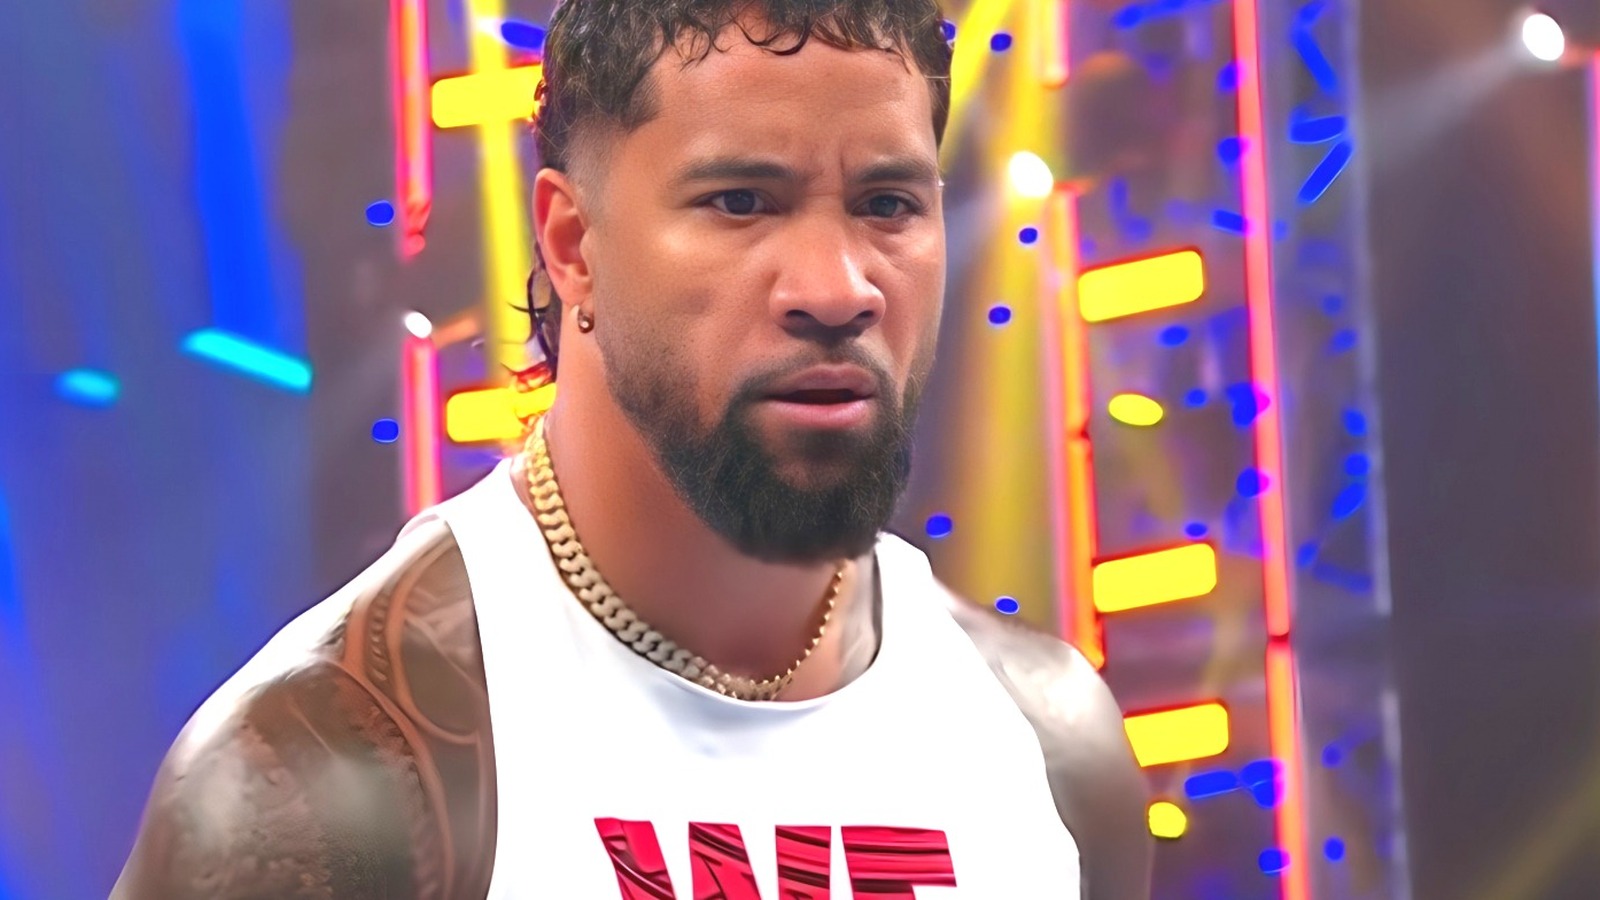 Jey Uso leaves The Bloodline on SmackDown, leaving fans shocked and uncertain about his future. 11